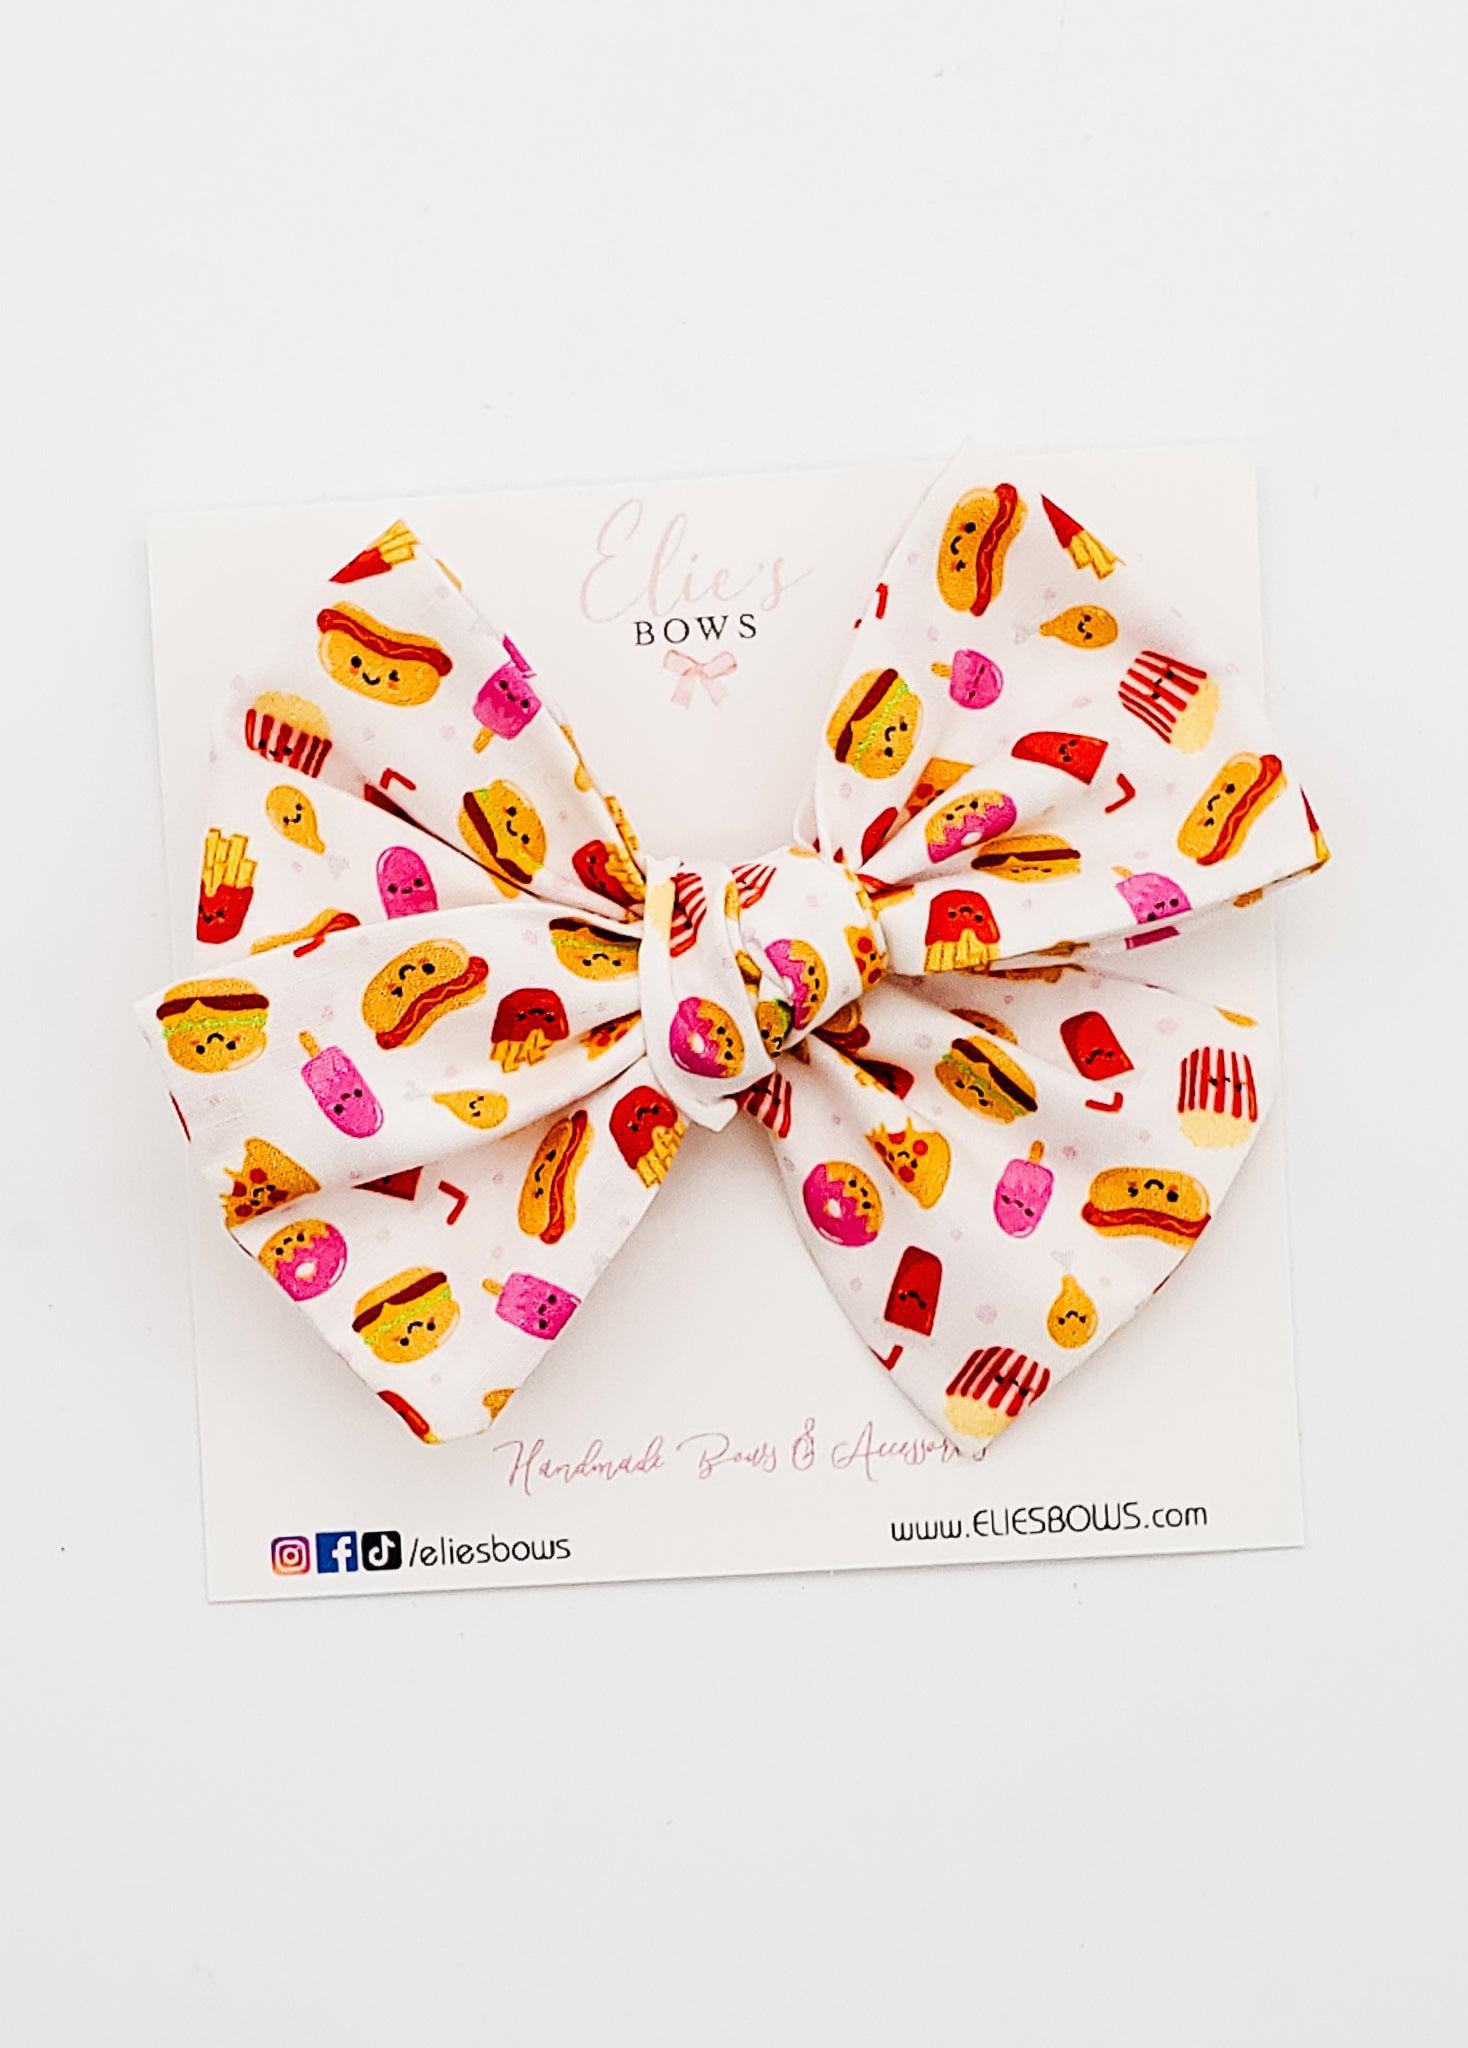 Fast Food - Elie - Fabric Bow - 3.5"-Bows-Elie’s Bows